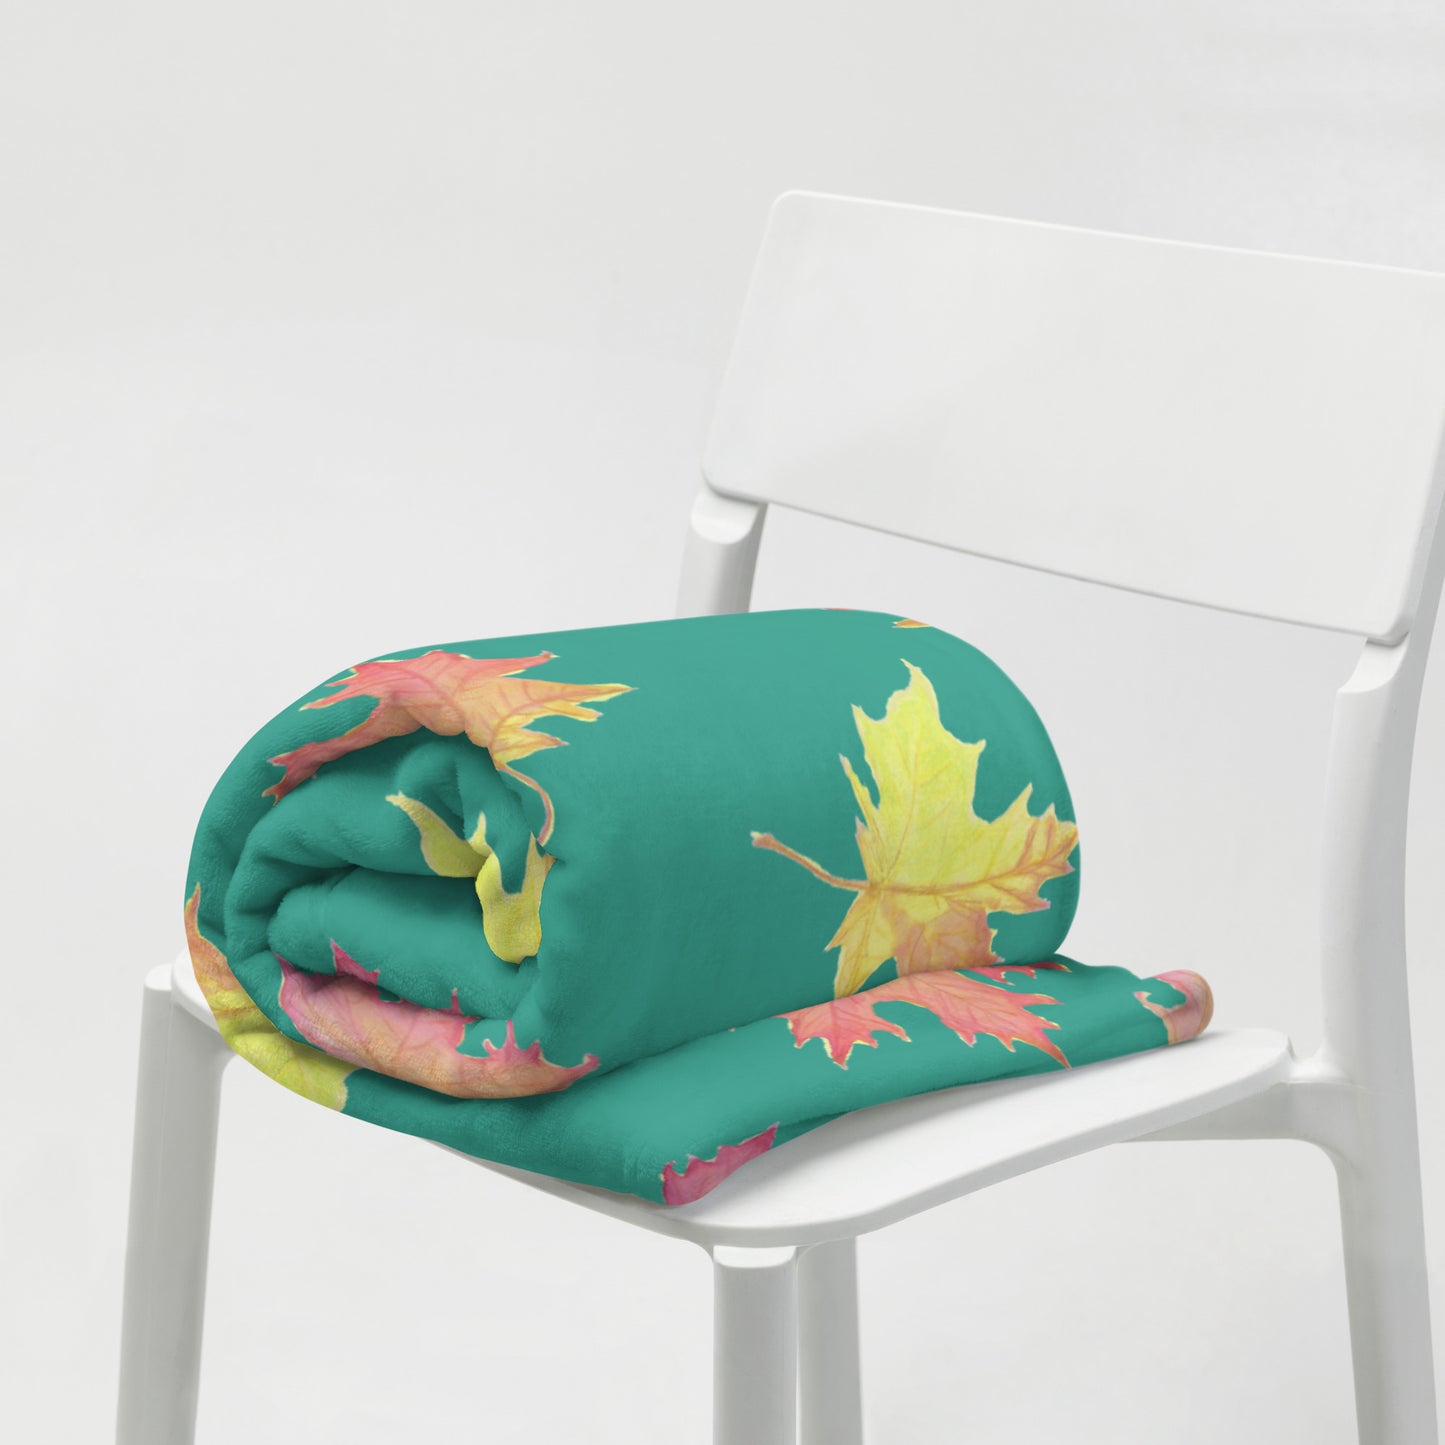 50 by 60 inch soft throw blanket featuring watercolor fall leaves patterned on a dark green background. Shown rolled up on a white chair.